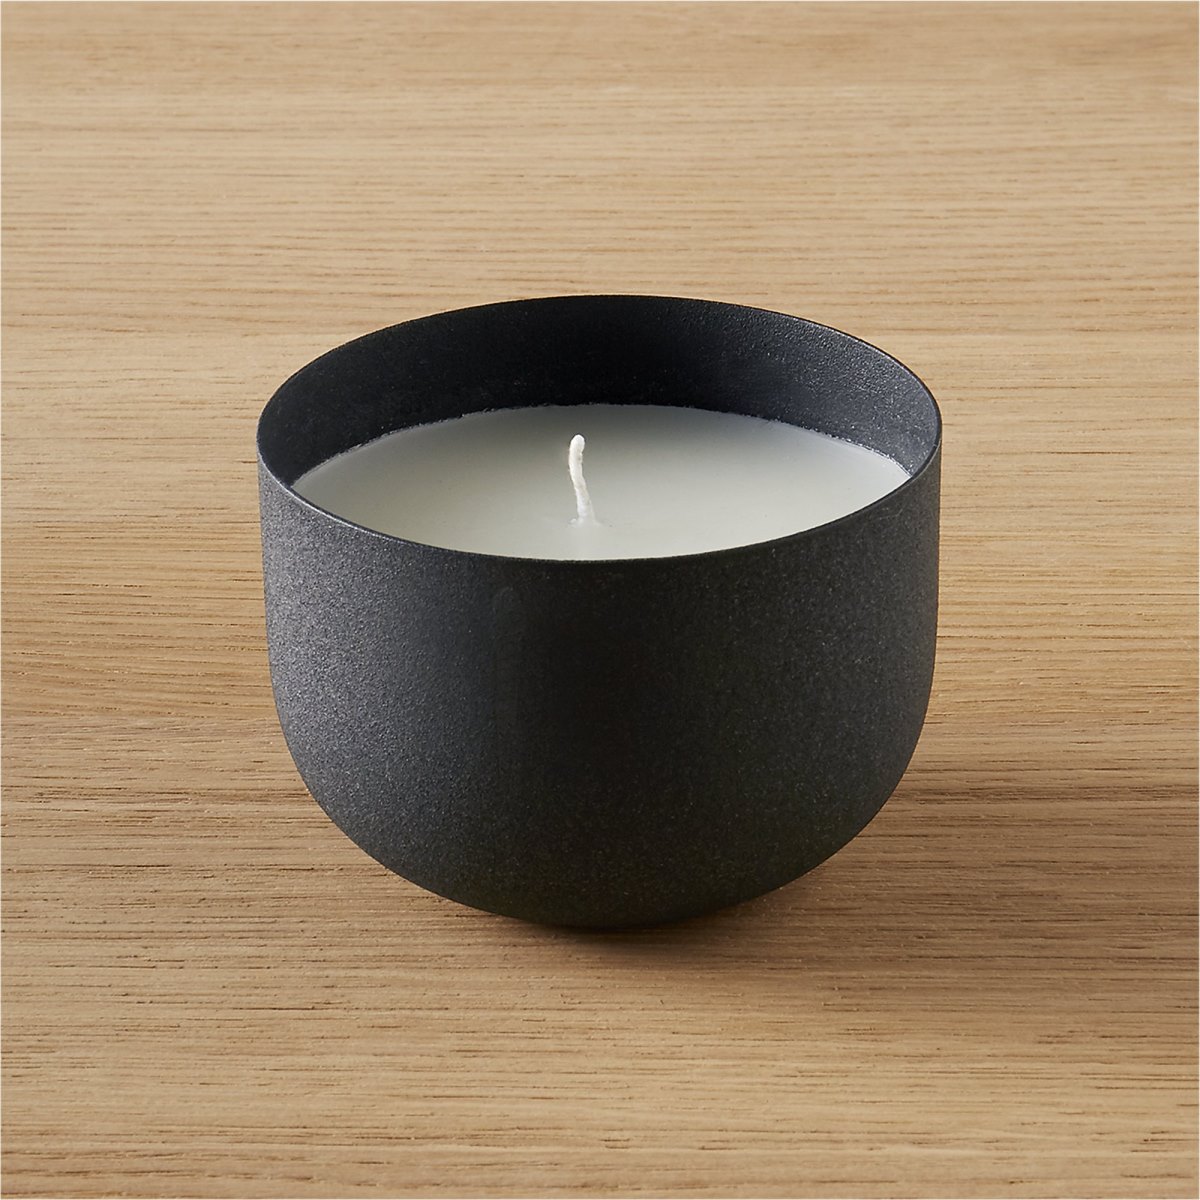 Black candle bowl from CB2